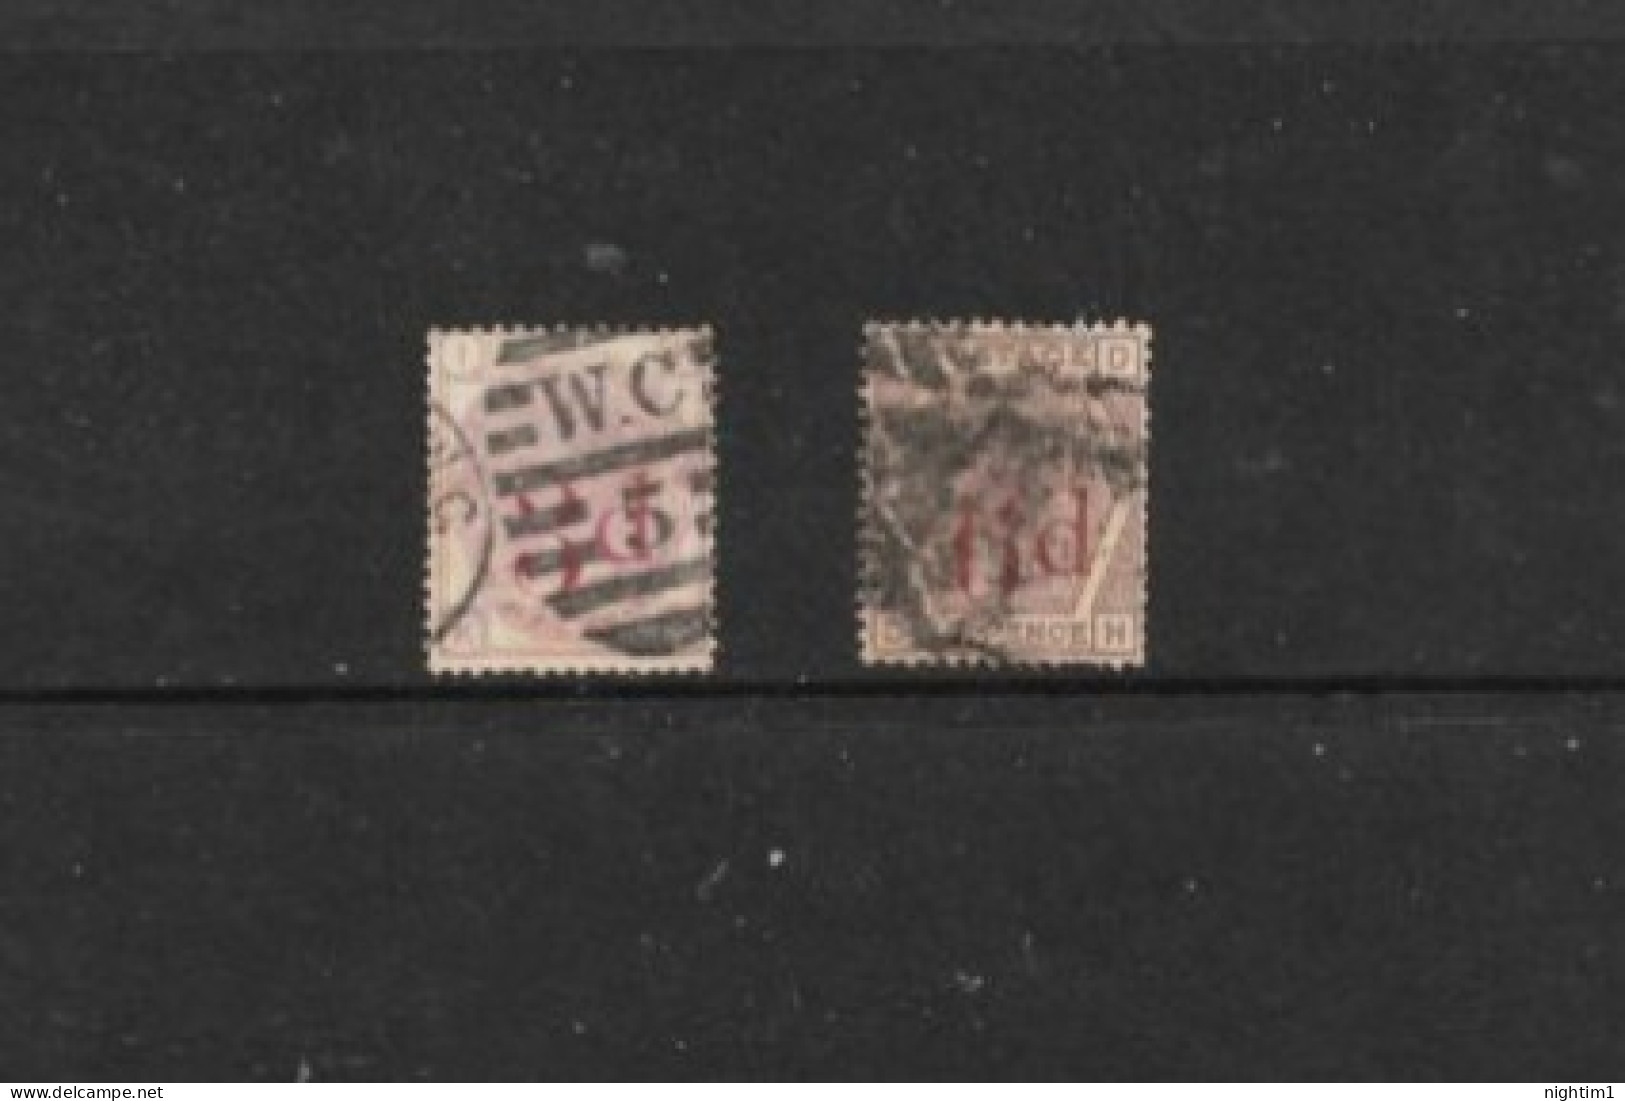 GREAT BRITAIN COLLECTION.  3d ON 3d AND 6d ON 6d. TWO STAMPS. - Oblitérés